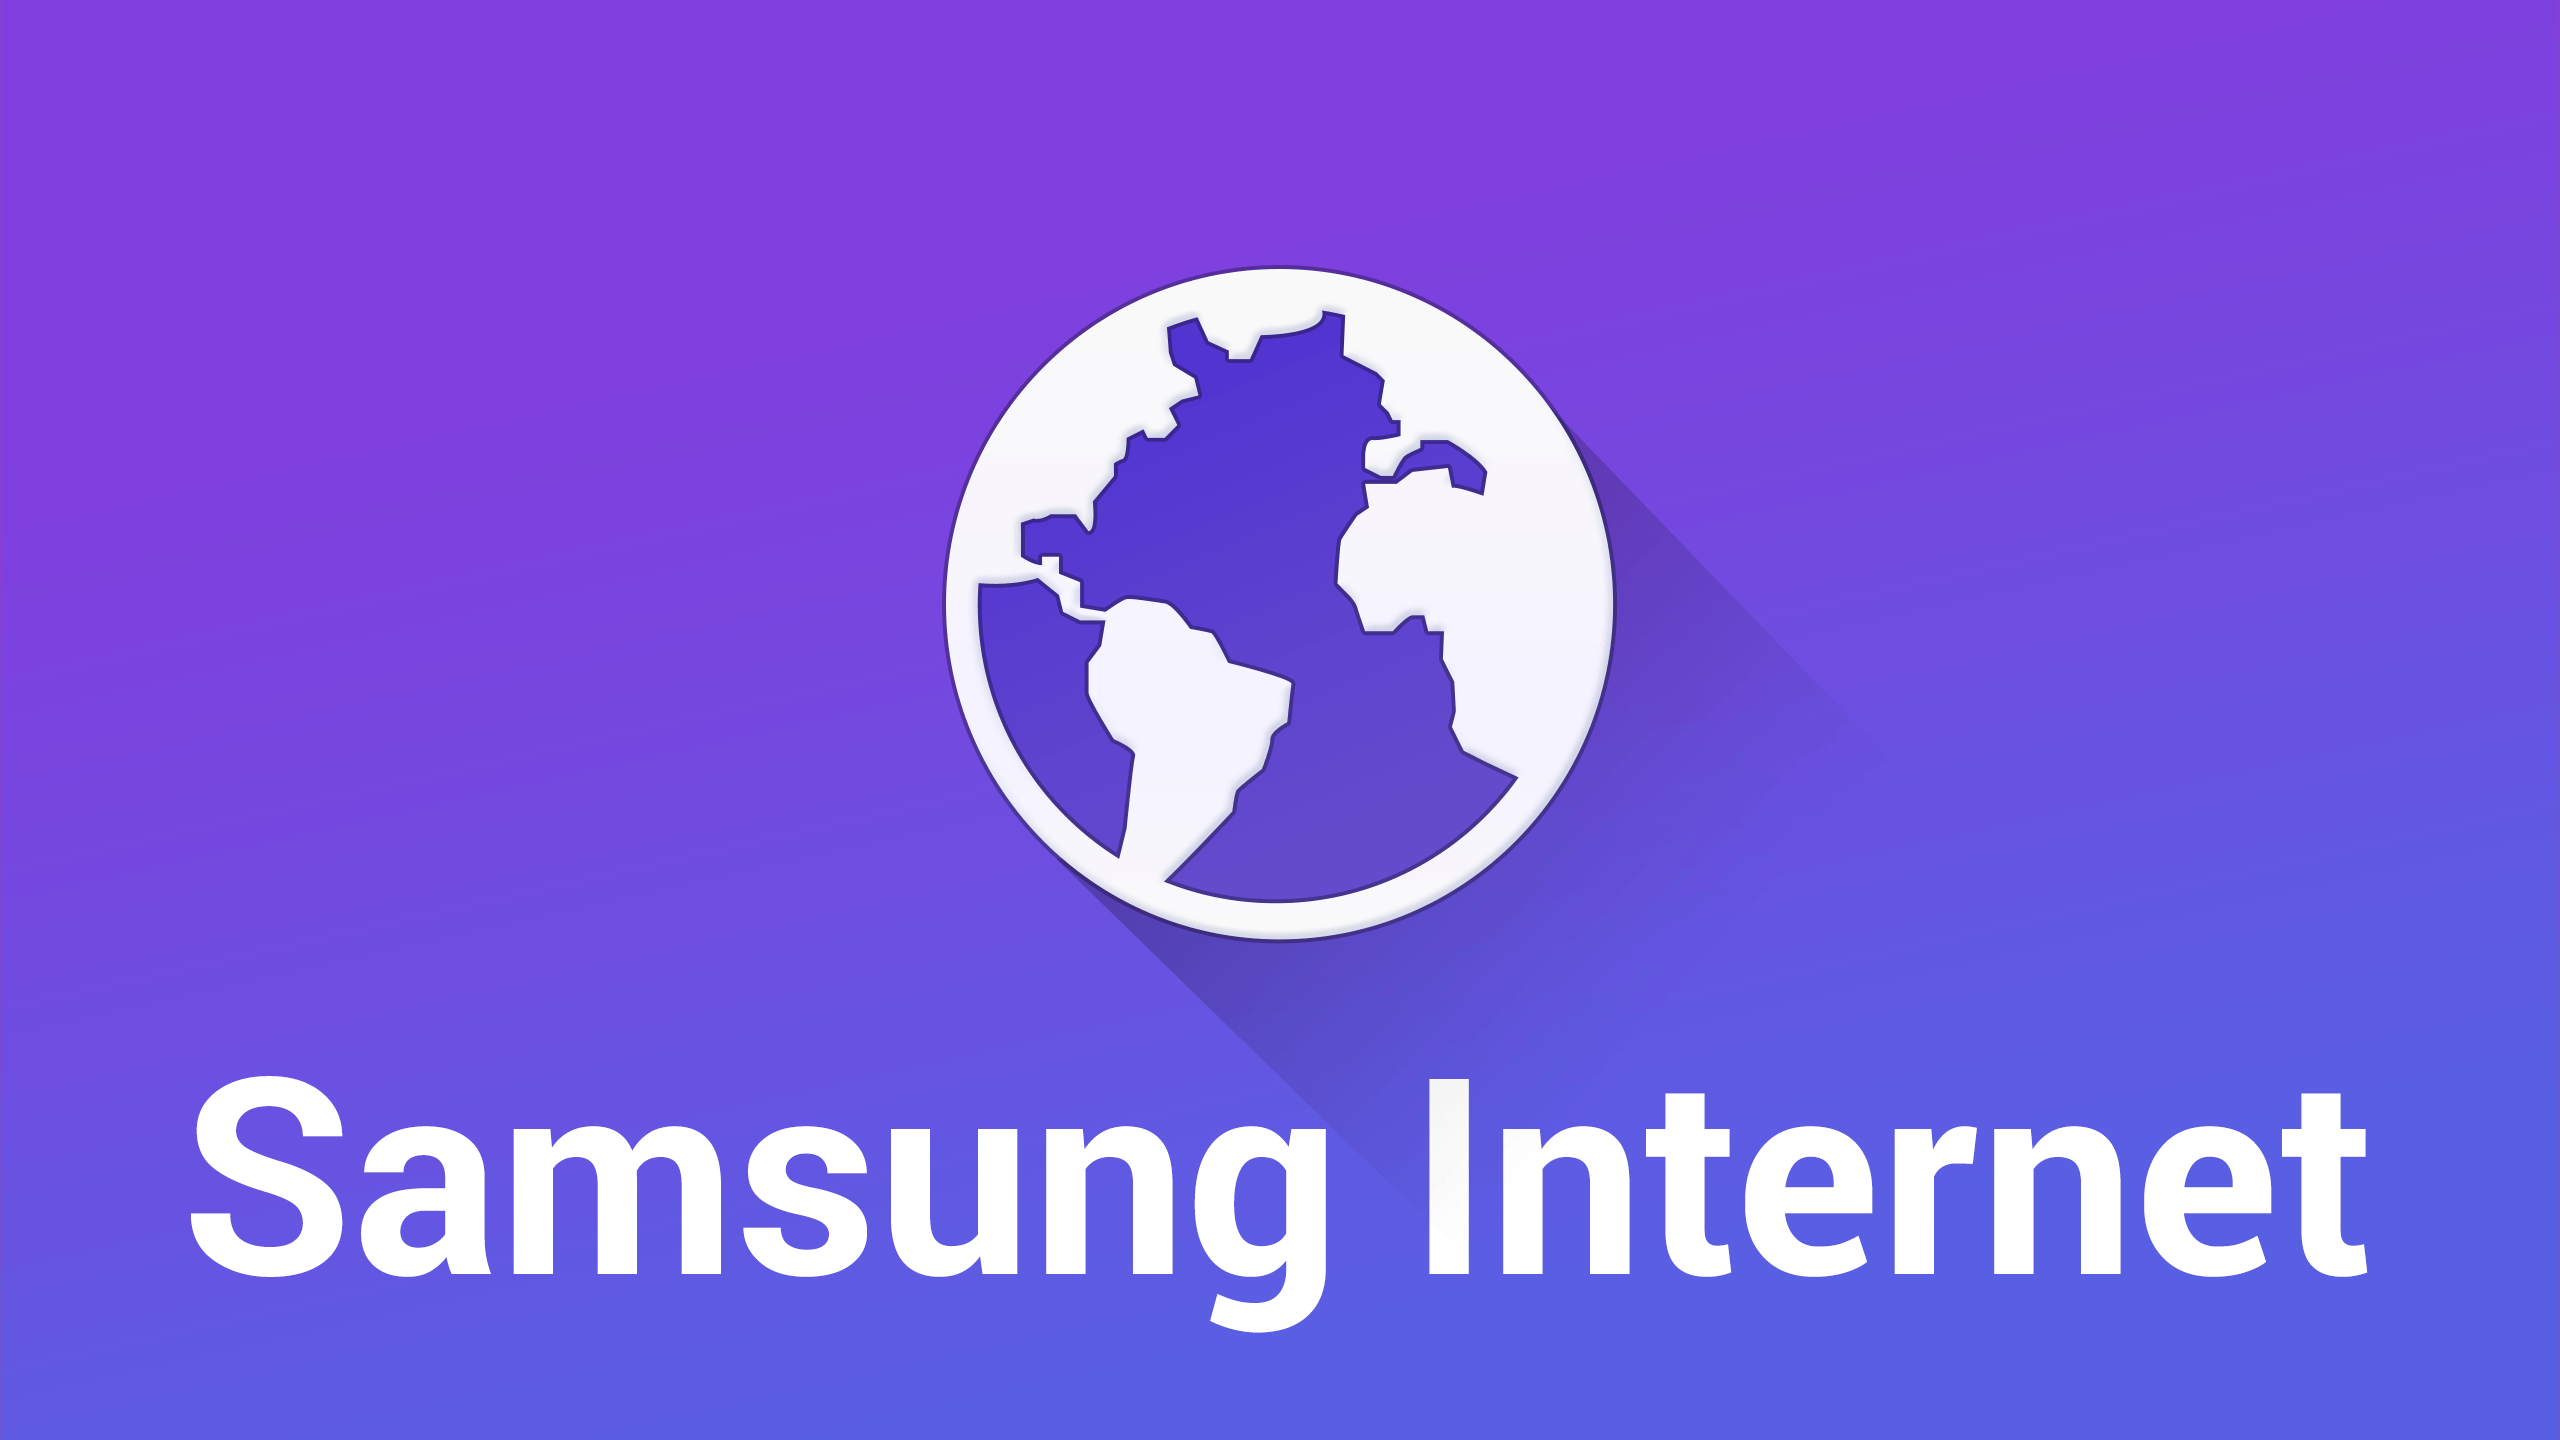 Samsung Browsers Logo - The latest Samsung Internet Beta brings improved download management